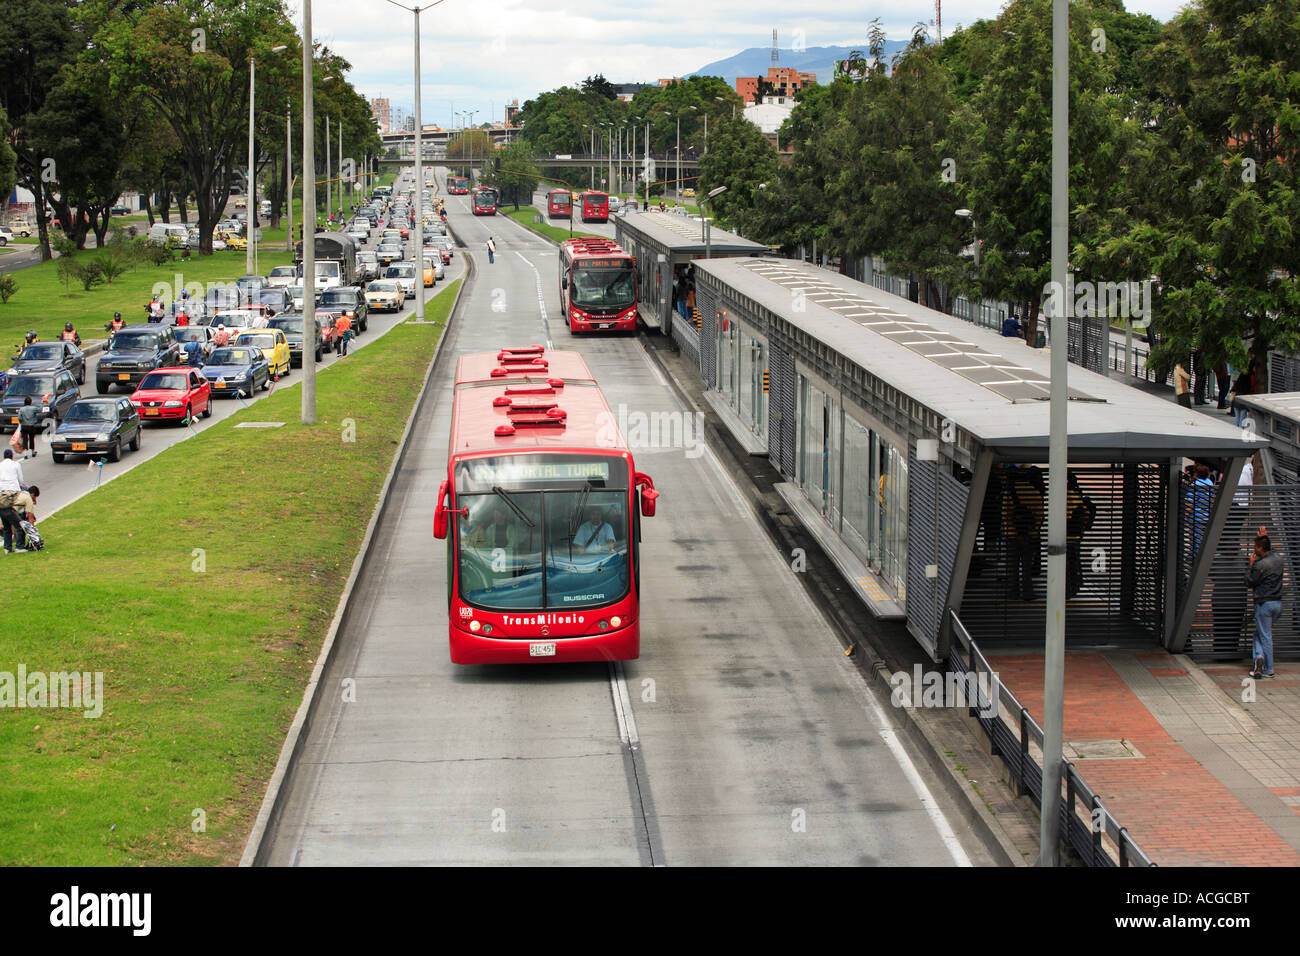 TransMilenio is the world's largest bus rapid transit system that serves Bogotá, the capital of Colombia. Stock Photo